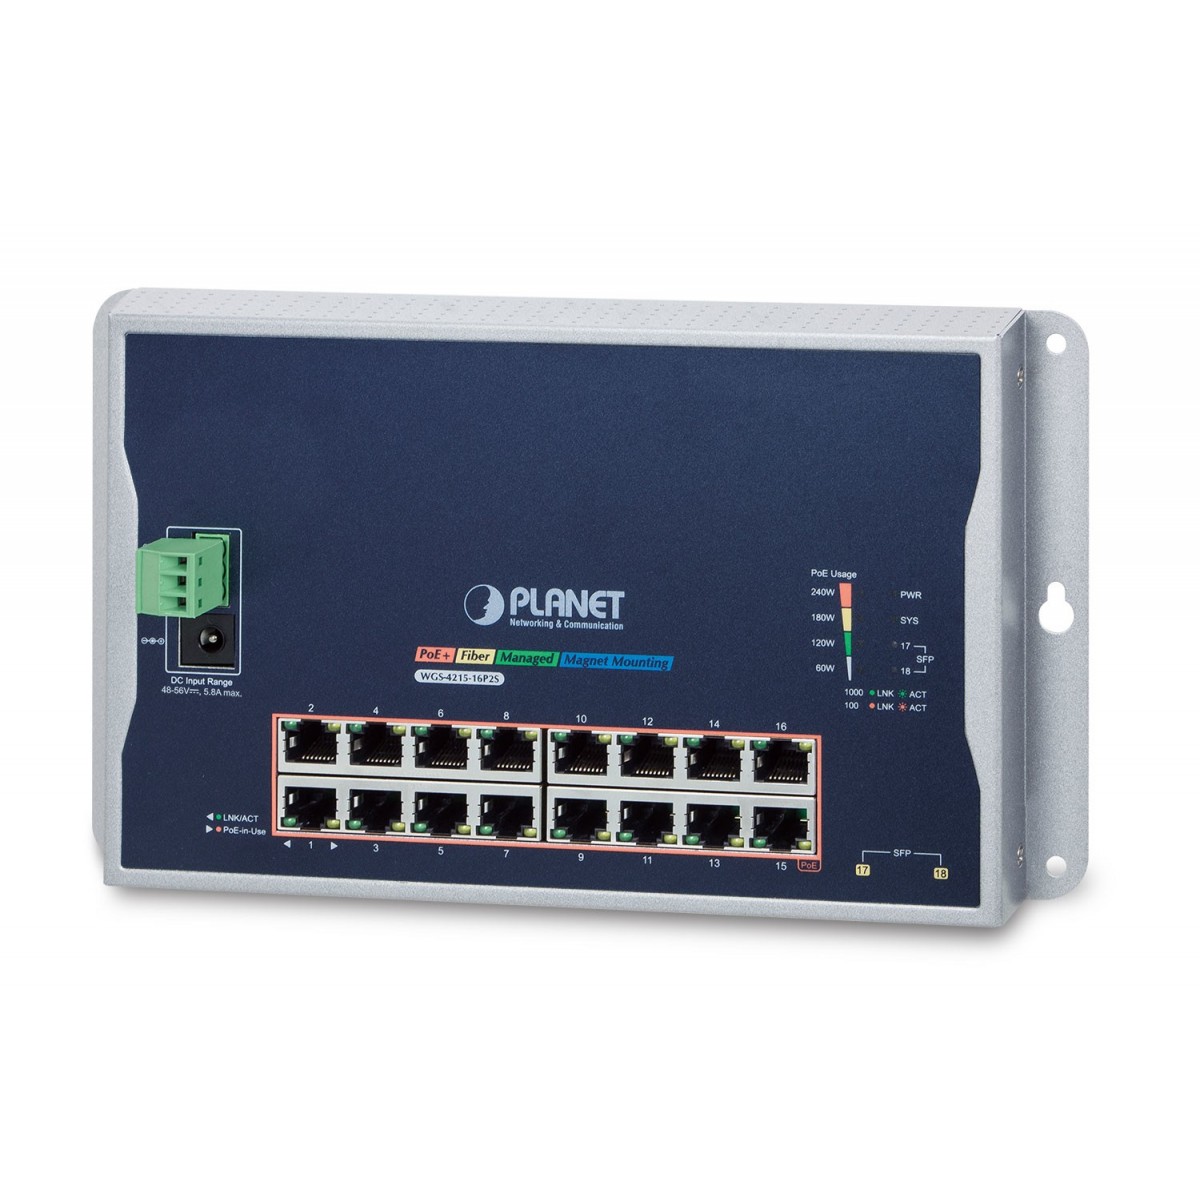 Planet WGS-4215-16P2S - Managed - L2 - Gigabit Ethernet (10/100/1000) - Full duplex - Power over Ethernet (PoE) - Wall mountable